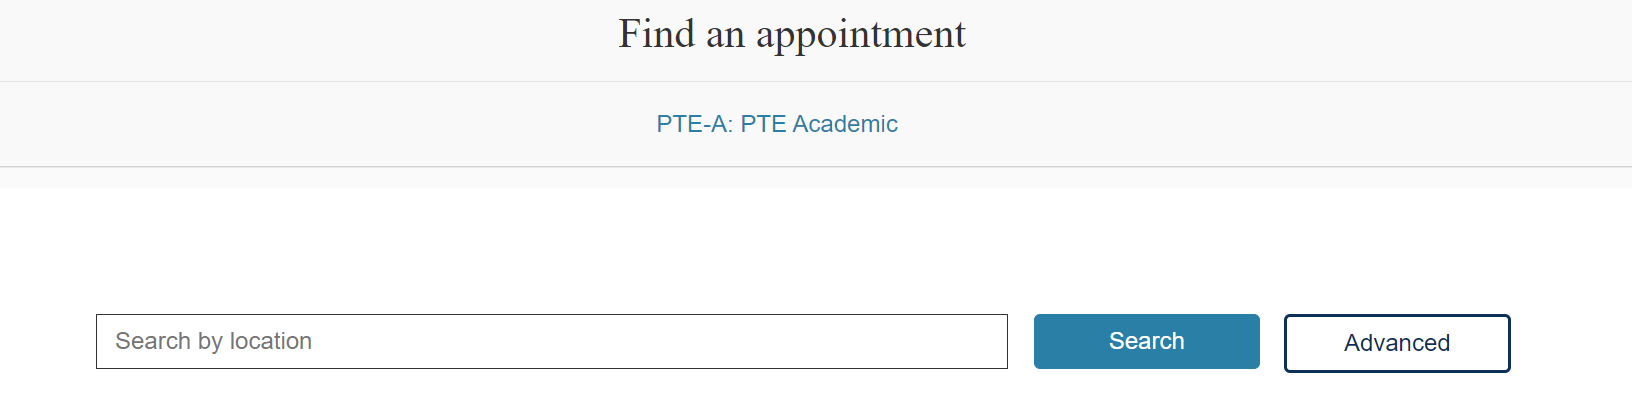 PTE Find appointment